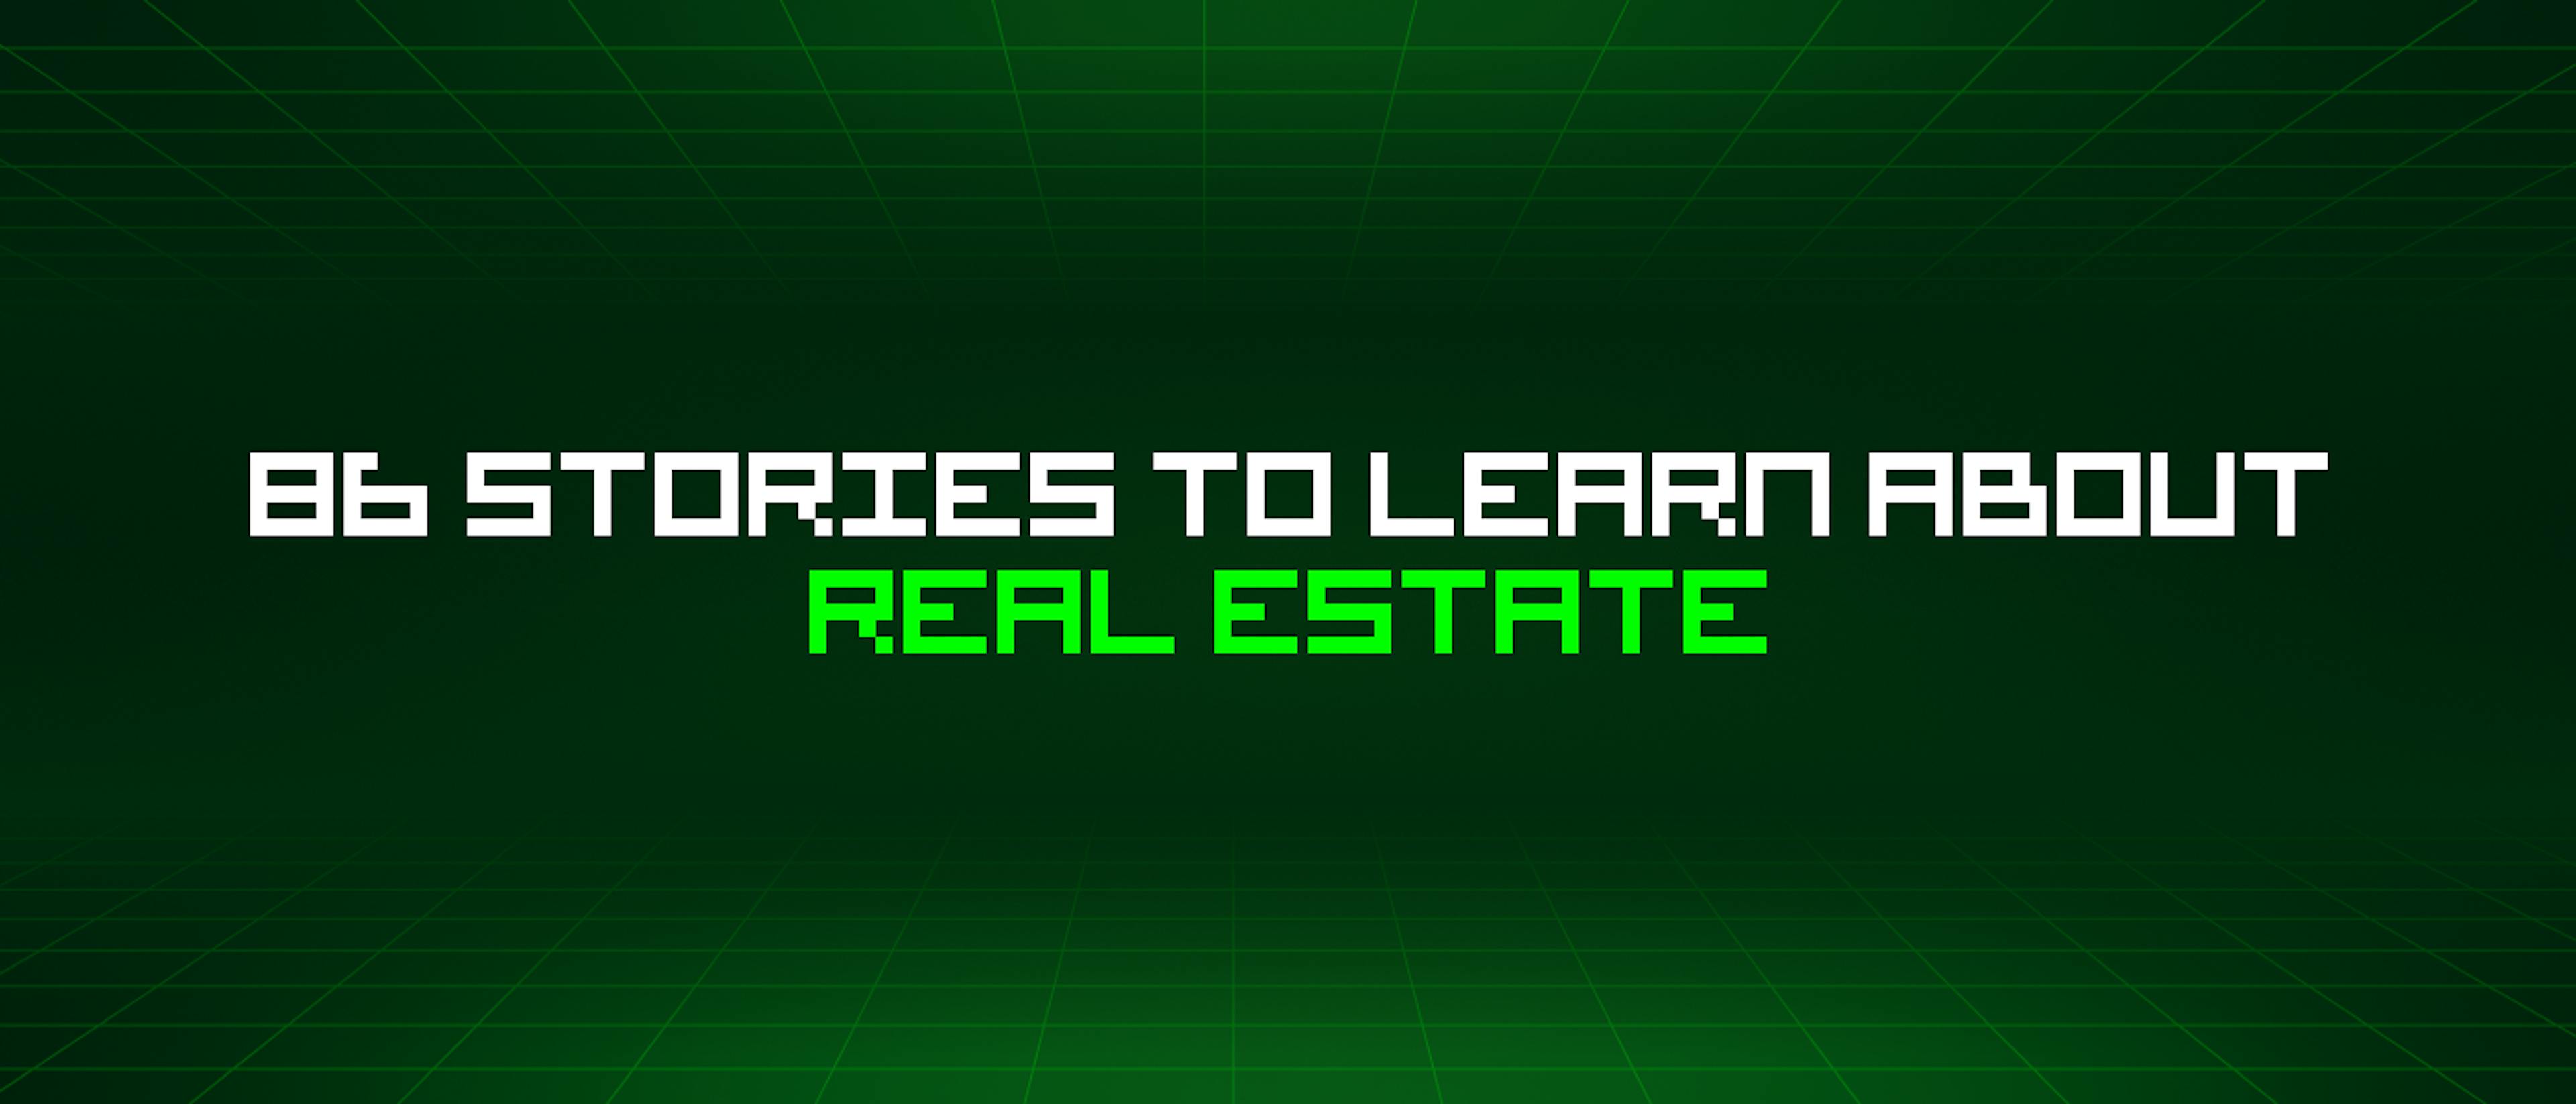 featured image - 86 Stories To Learn About Real Estate